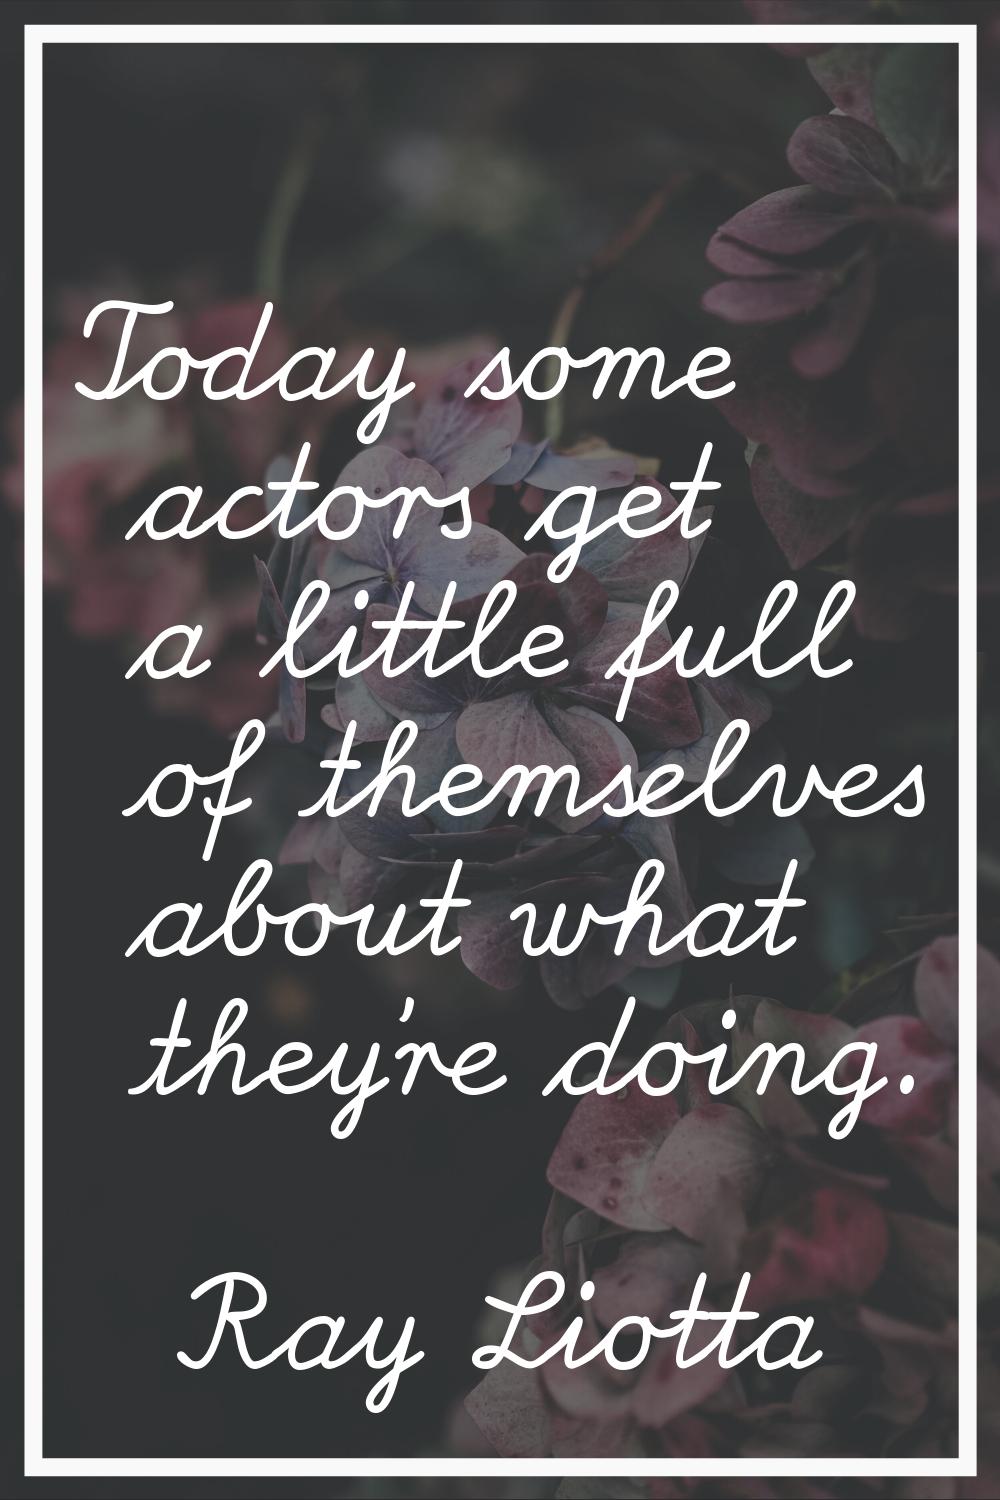 Today some actors get a little full of themselves about what they're doing.